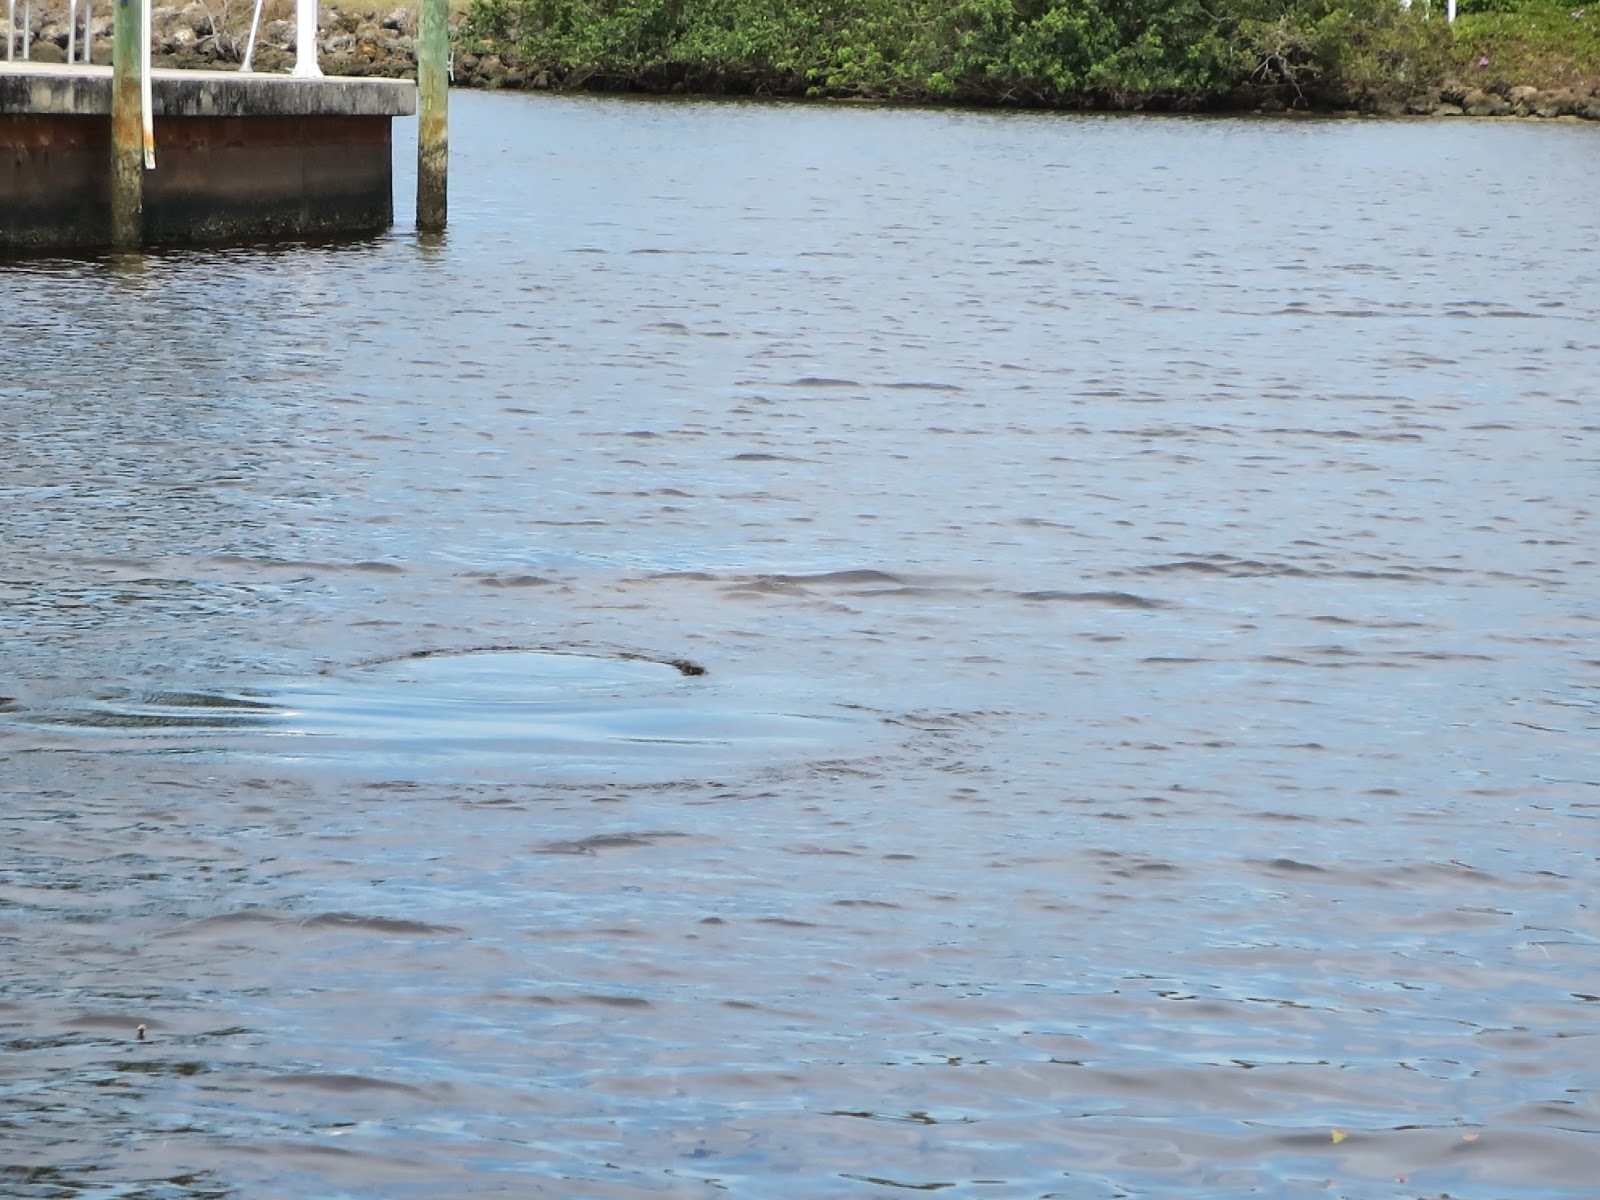 Where to See Manatees in Florida? Manatee footprints in the water on the Florida Gulf Coast